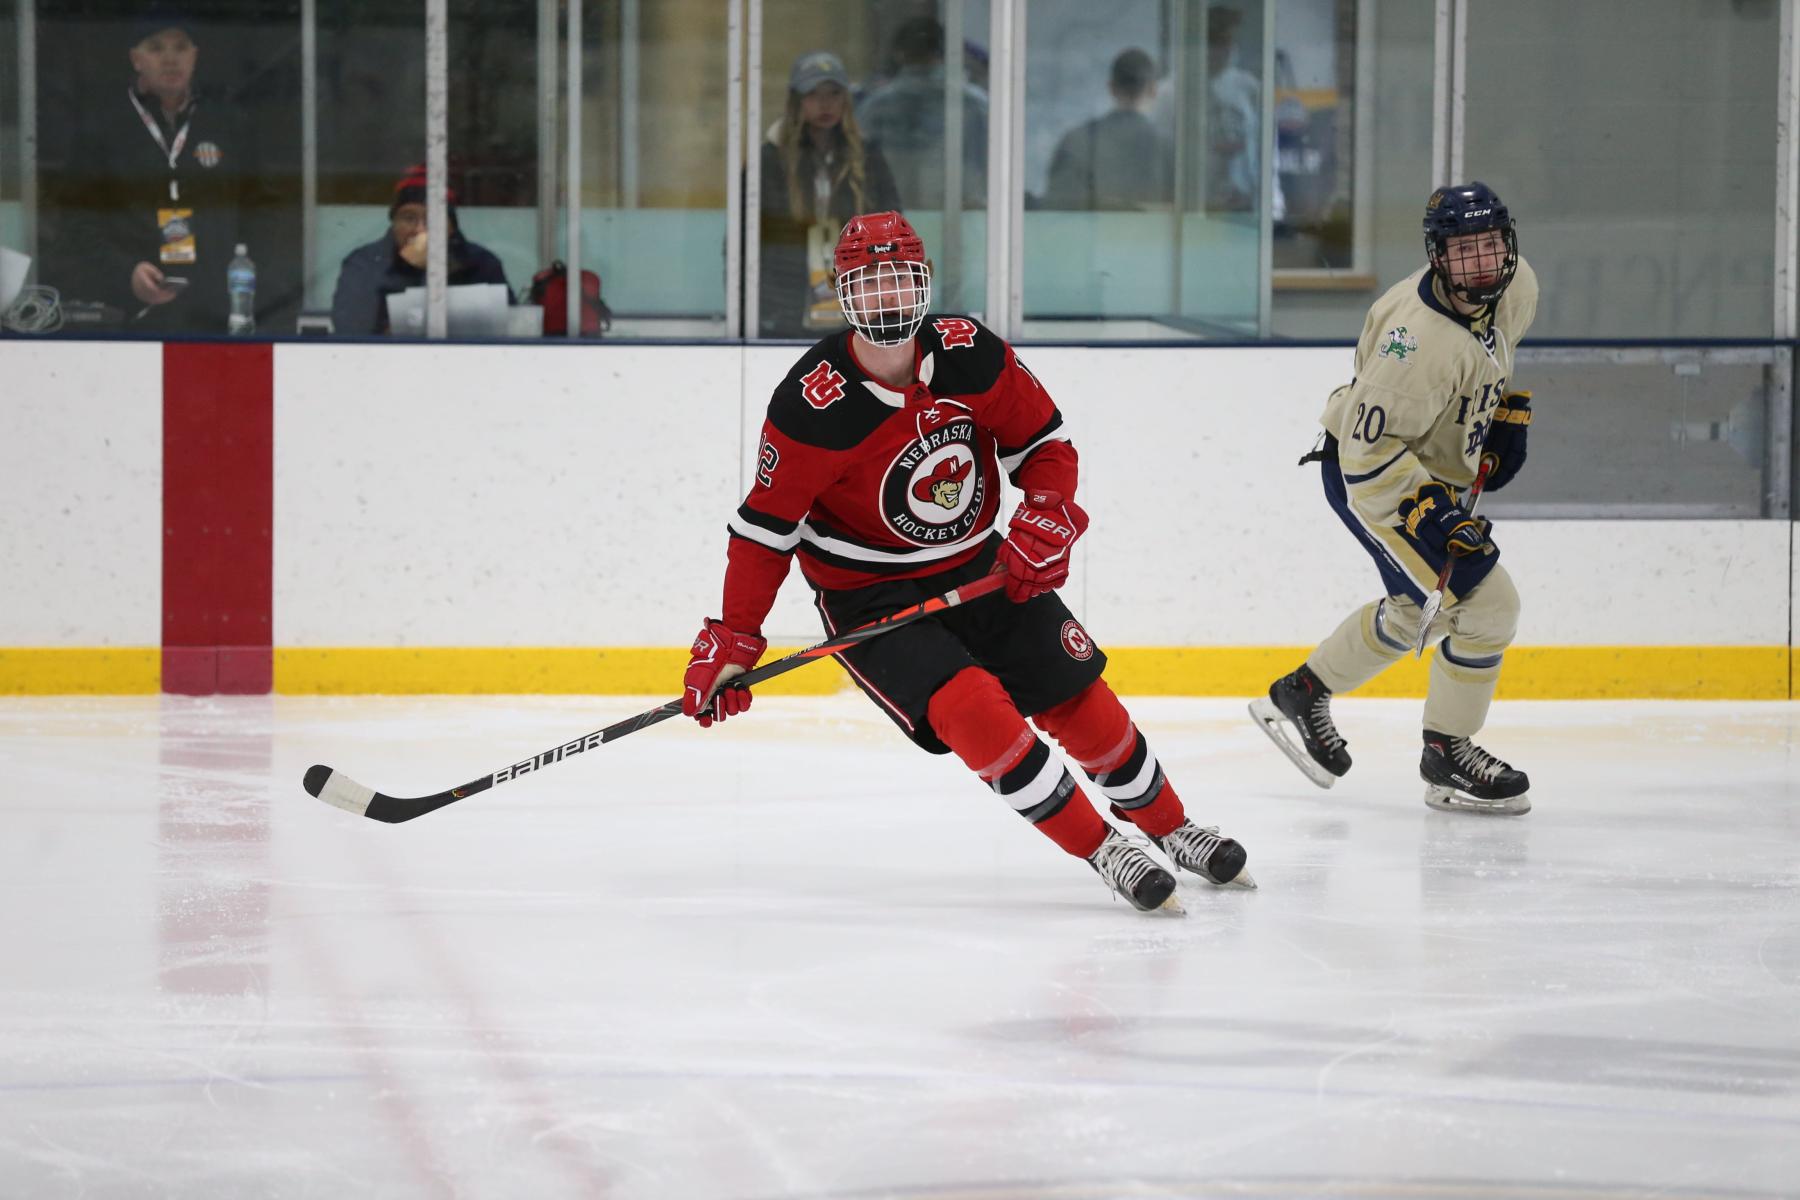 Members of the Men's Hockey sport club compete at regionals.